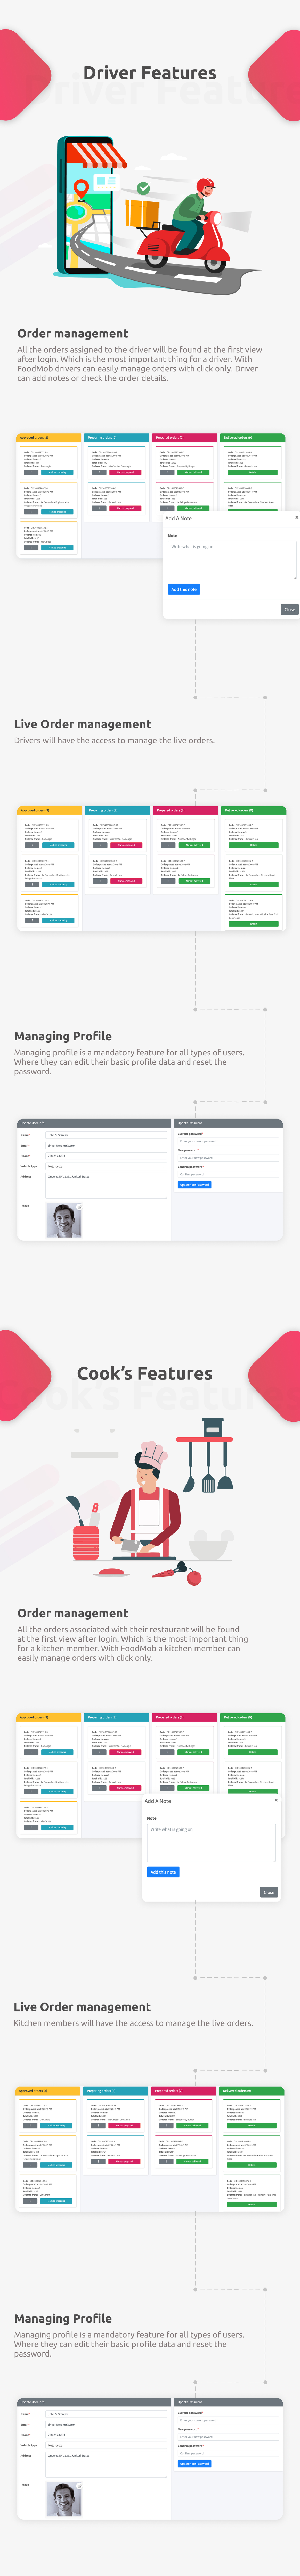 FoodMob - An Online Multi Restaurant Food Ordering and Management with Delivery System - Driver and Cooks features